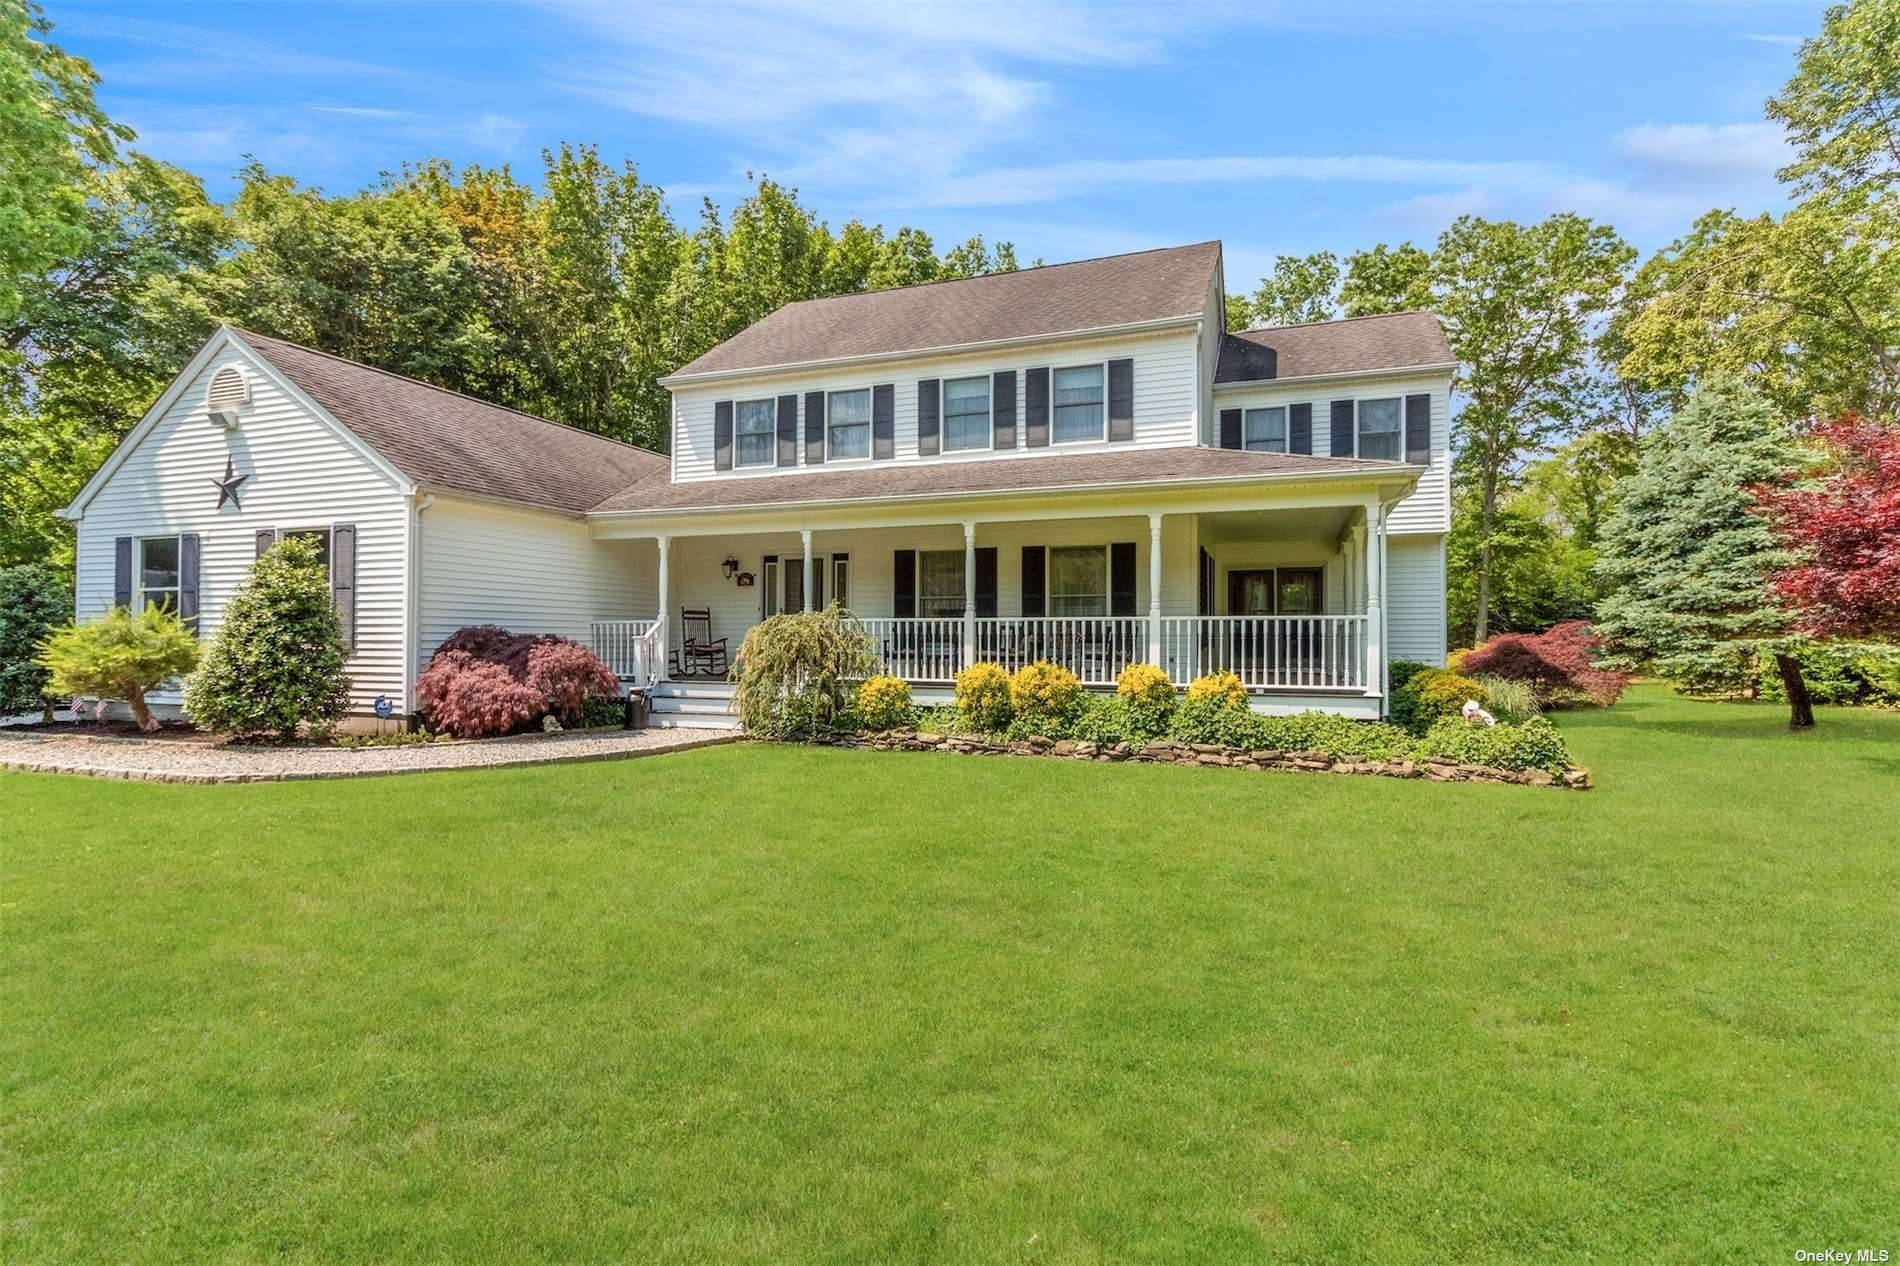 Tucked away in Golden View Estates rests this beautiful colonial classic on a sprawling shy acre of land.